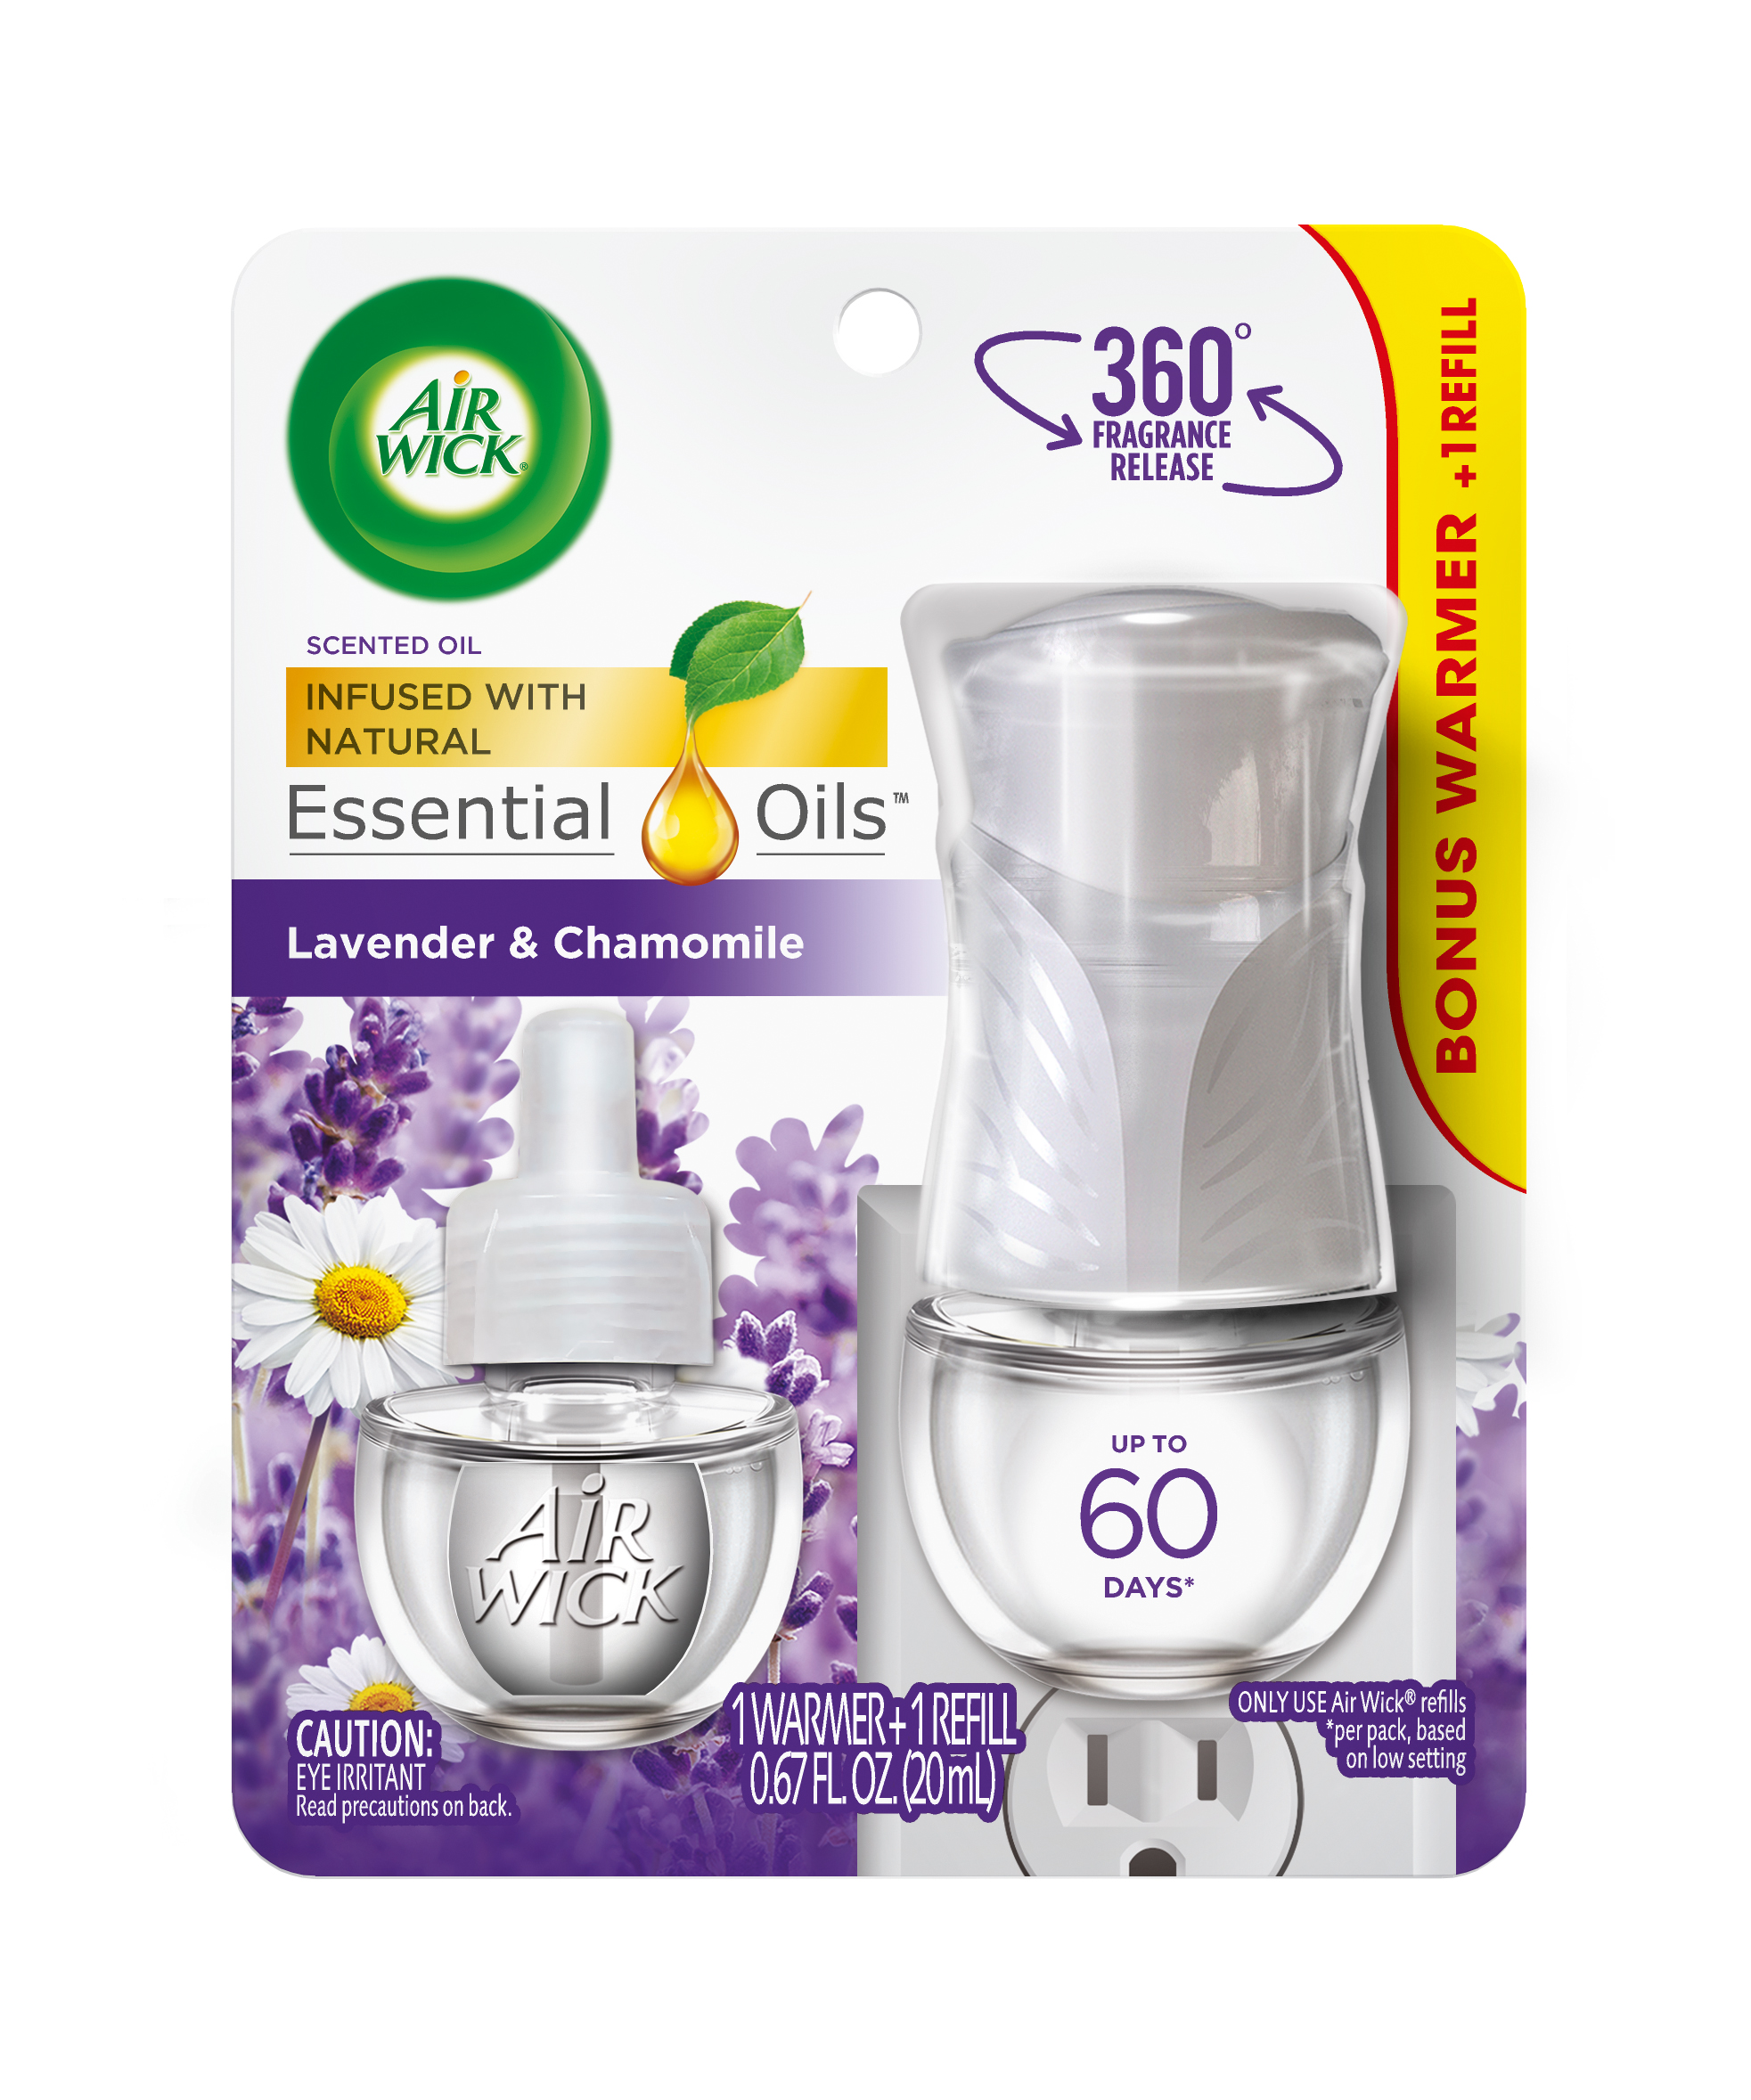 AIR WICK Scented Oil  Lavender  Chamomile  Kit